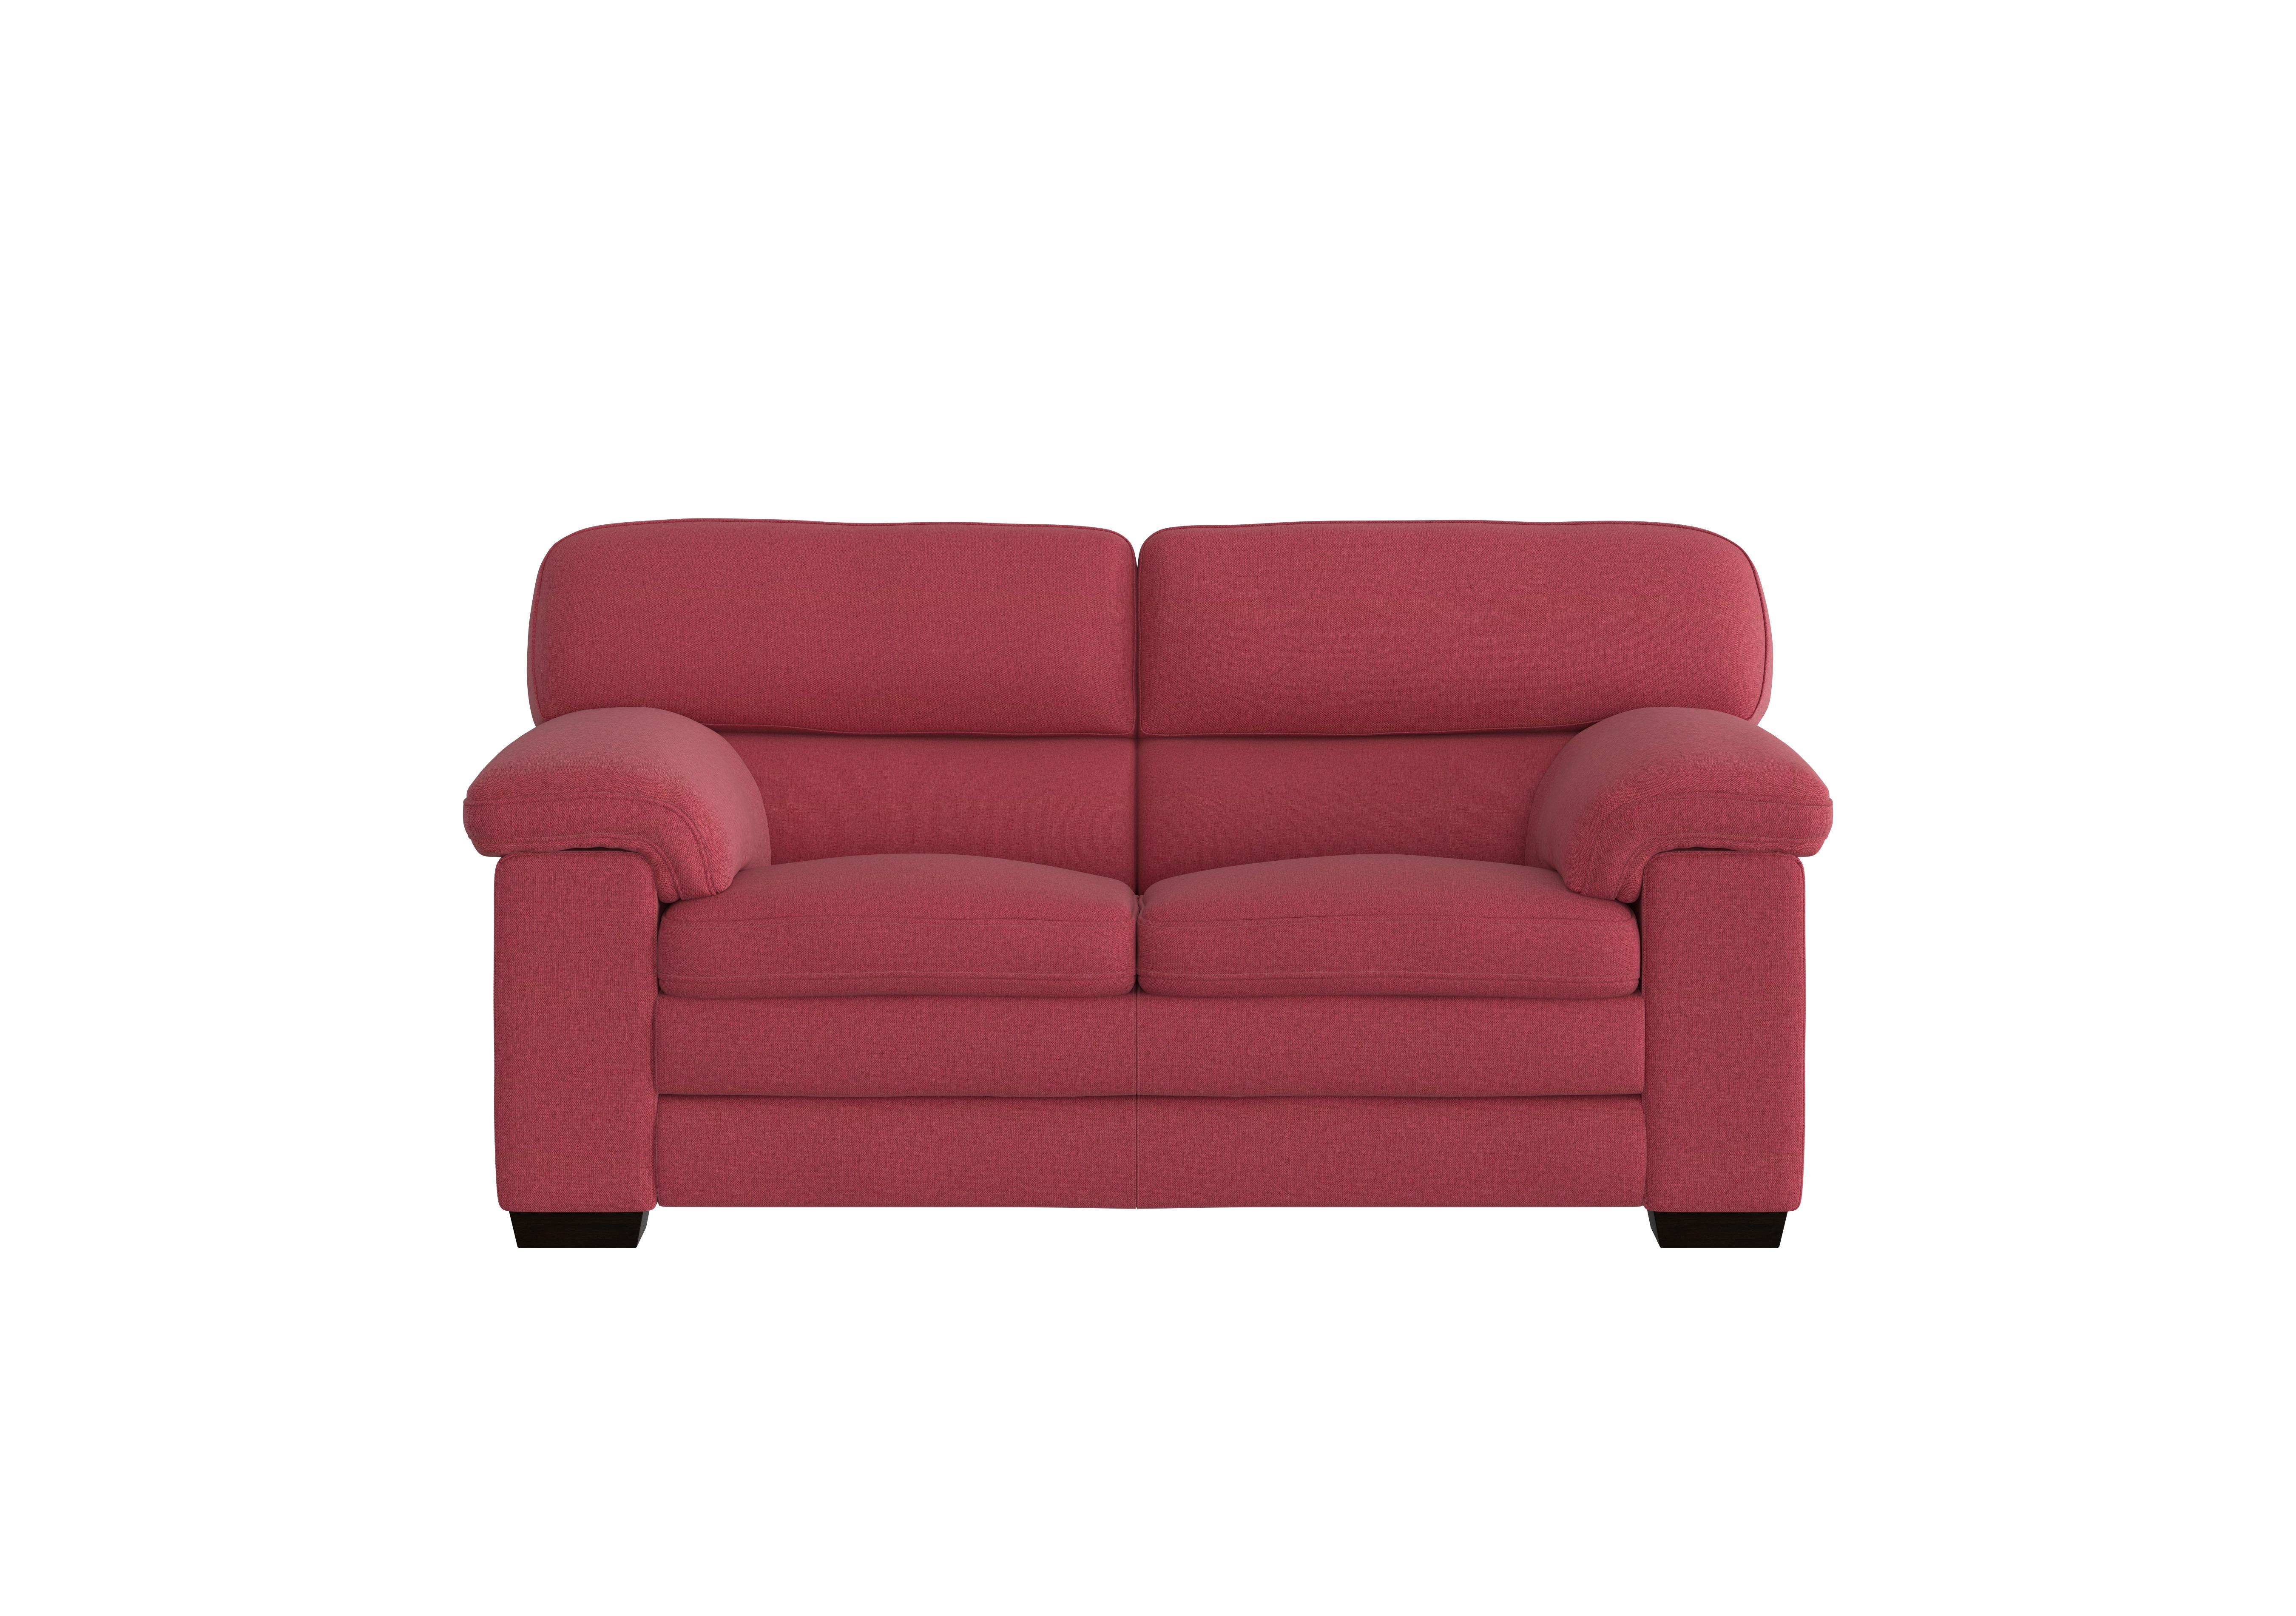 Cozee Fabric 2 Seater Sofa in Fab-Blt-R29 Red on Furniture Village